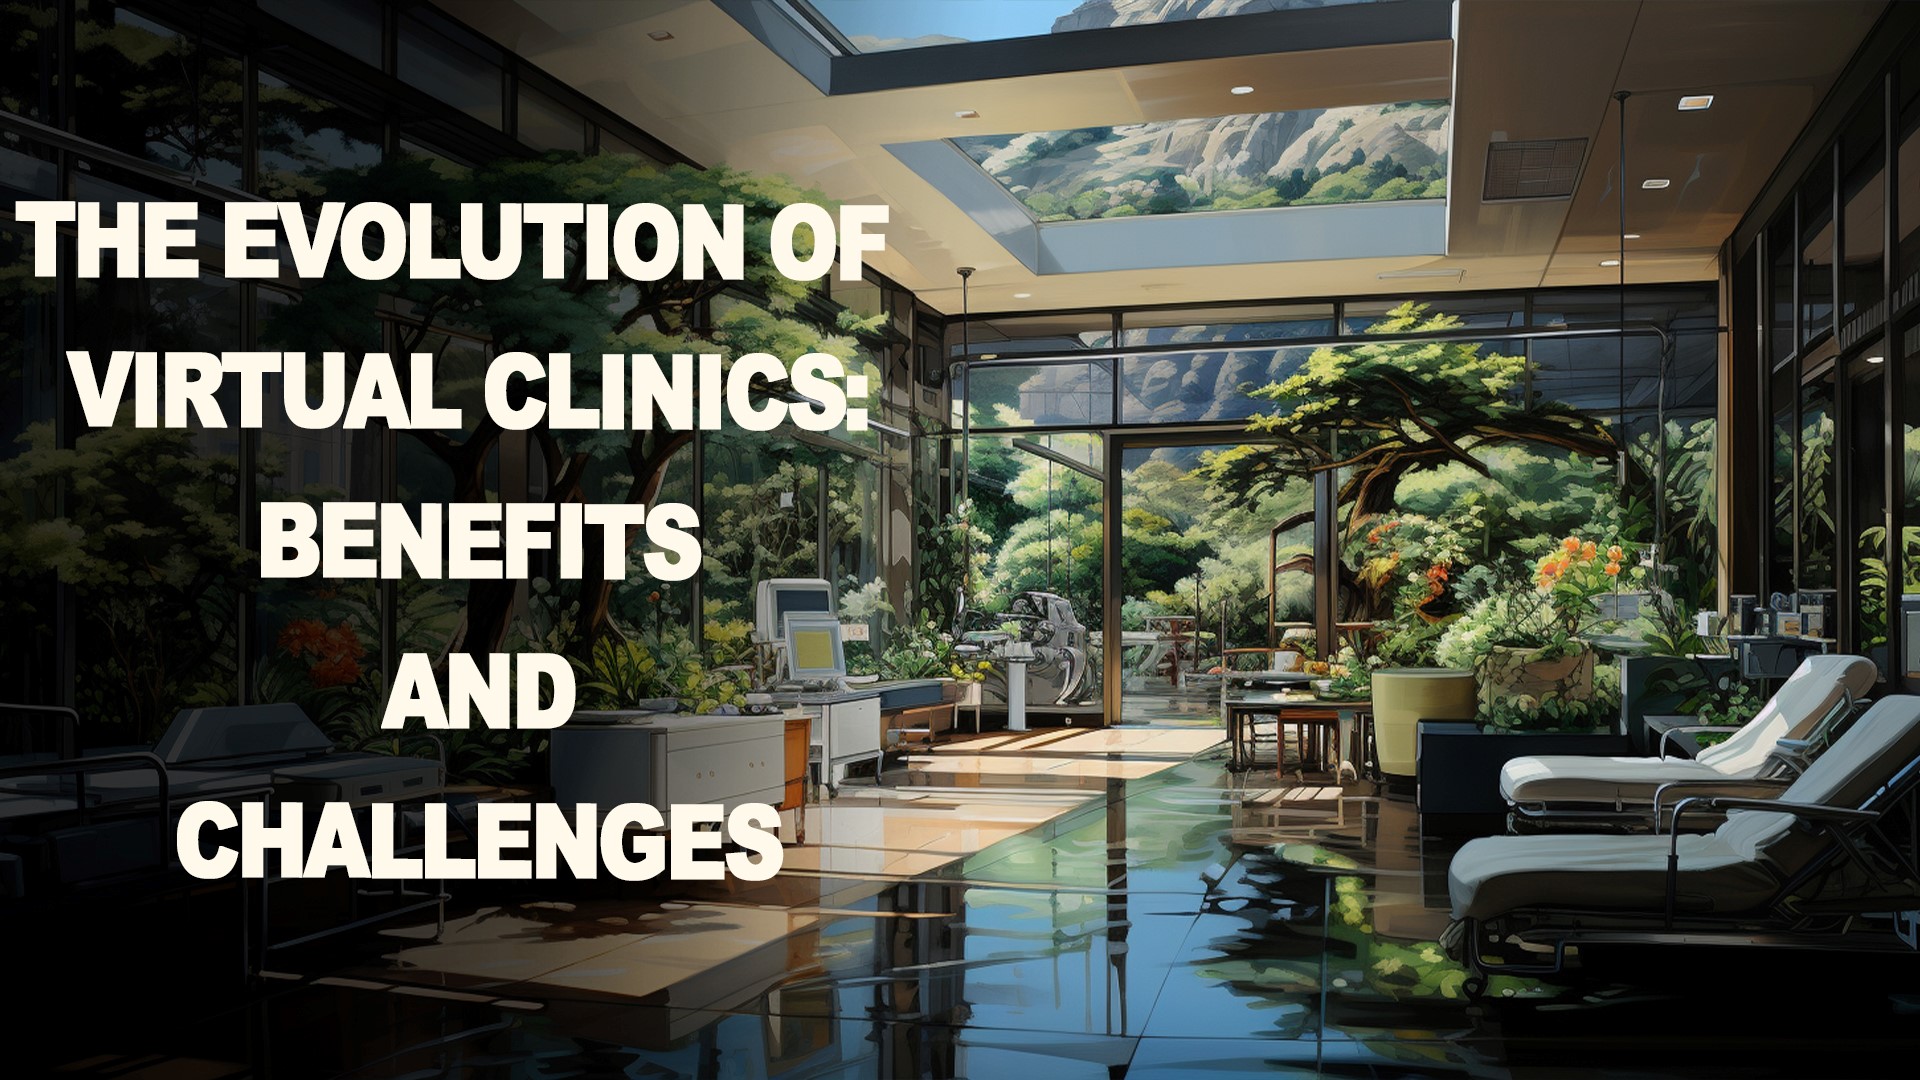 The Evolution of Virtual Clinics: Benefits and Challenges